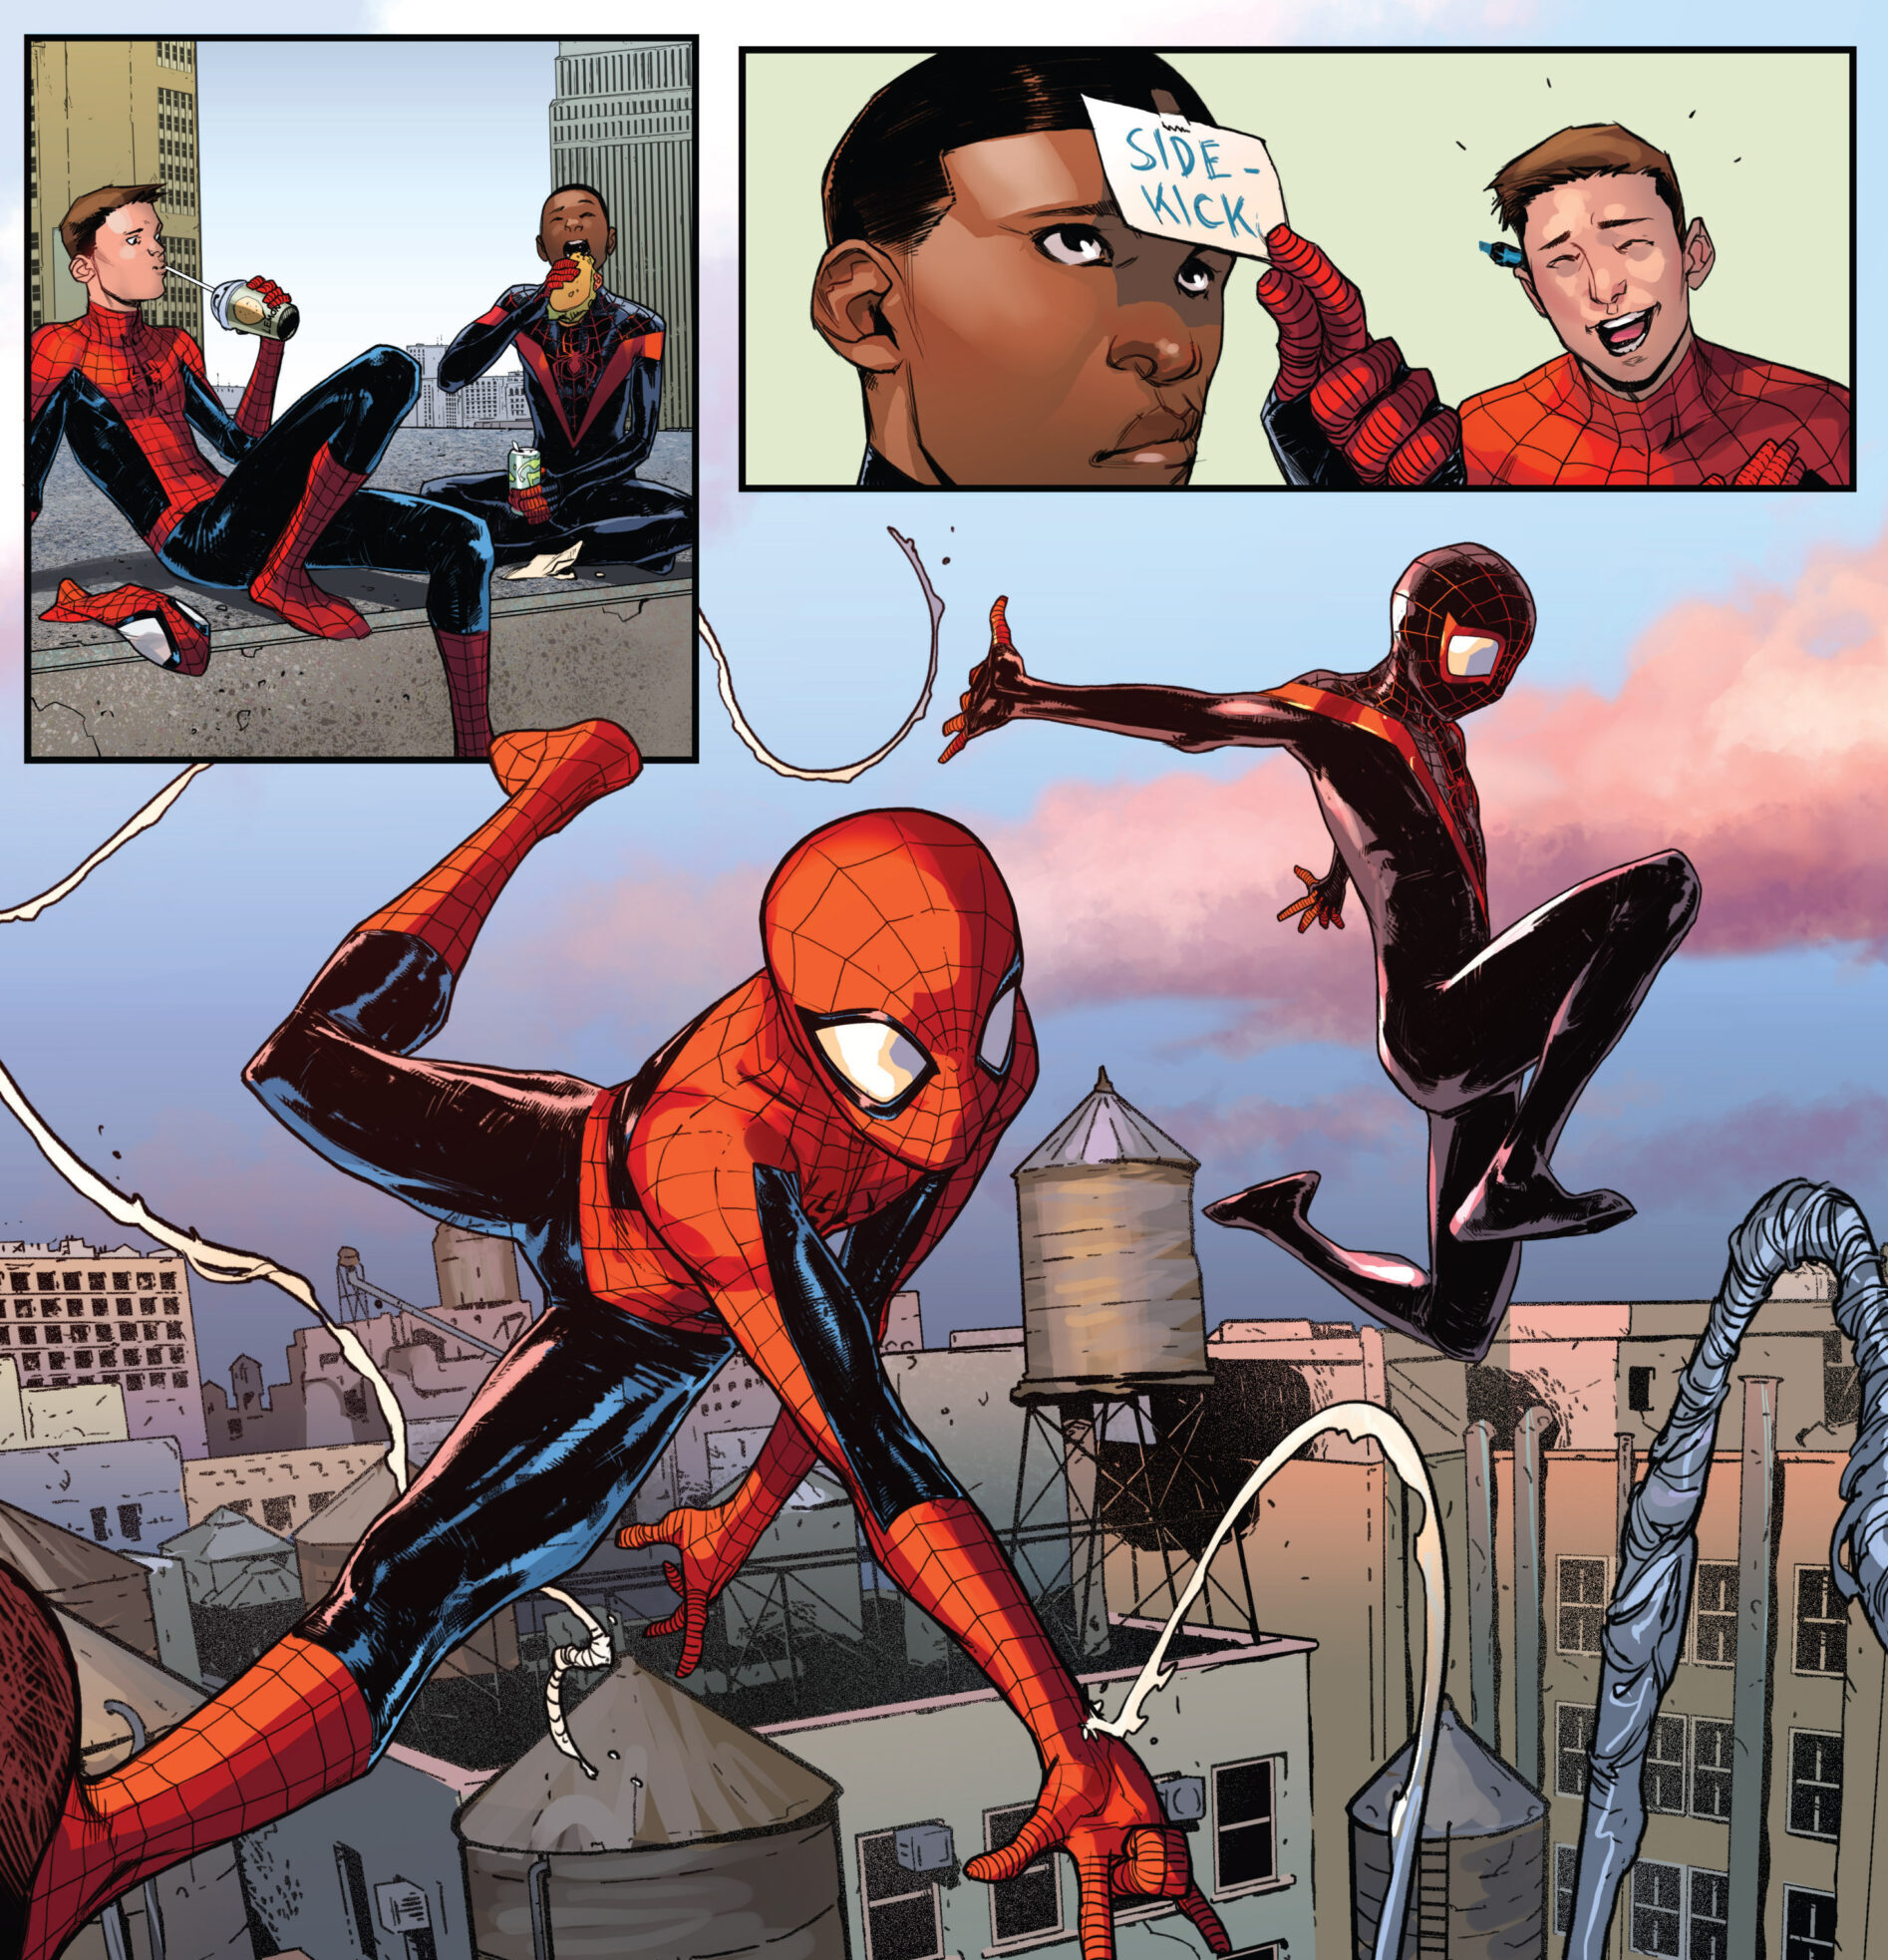 The two Spider-Men of the 1610 take to the skies in Ultimate Spider-Man Vol. 1 #200 (2014), Marvel Comics. WOrds by Brian Michael Bendis, art by David Marquez, Mark Bagley, Mark Brooks, Stuart Immonen, David Lafuente, Sara Pichelli, Justin Ponsor, and Cory Petit.